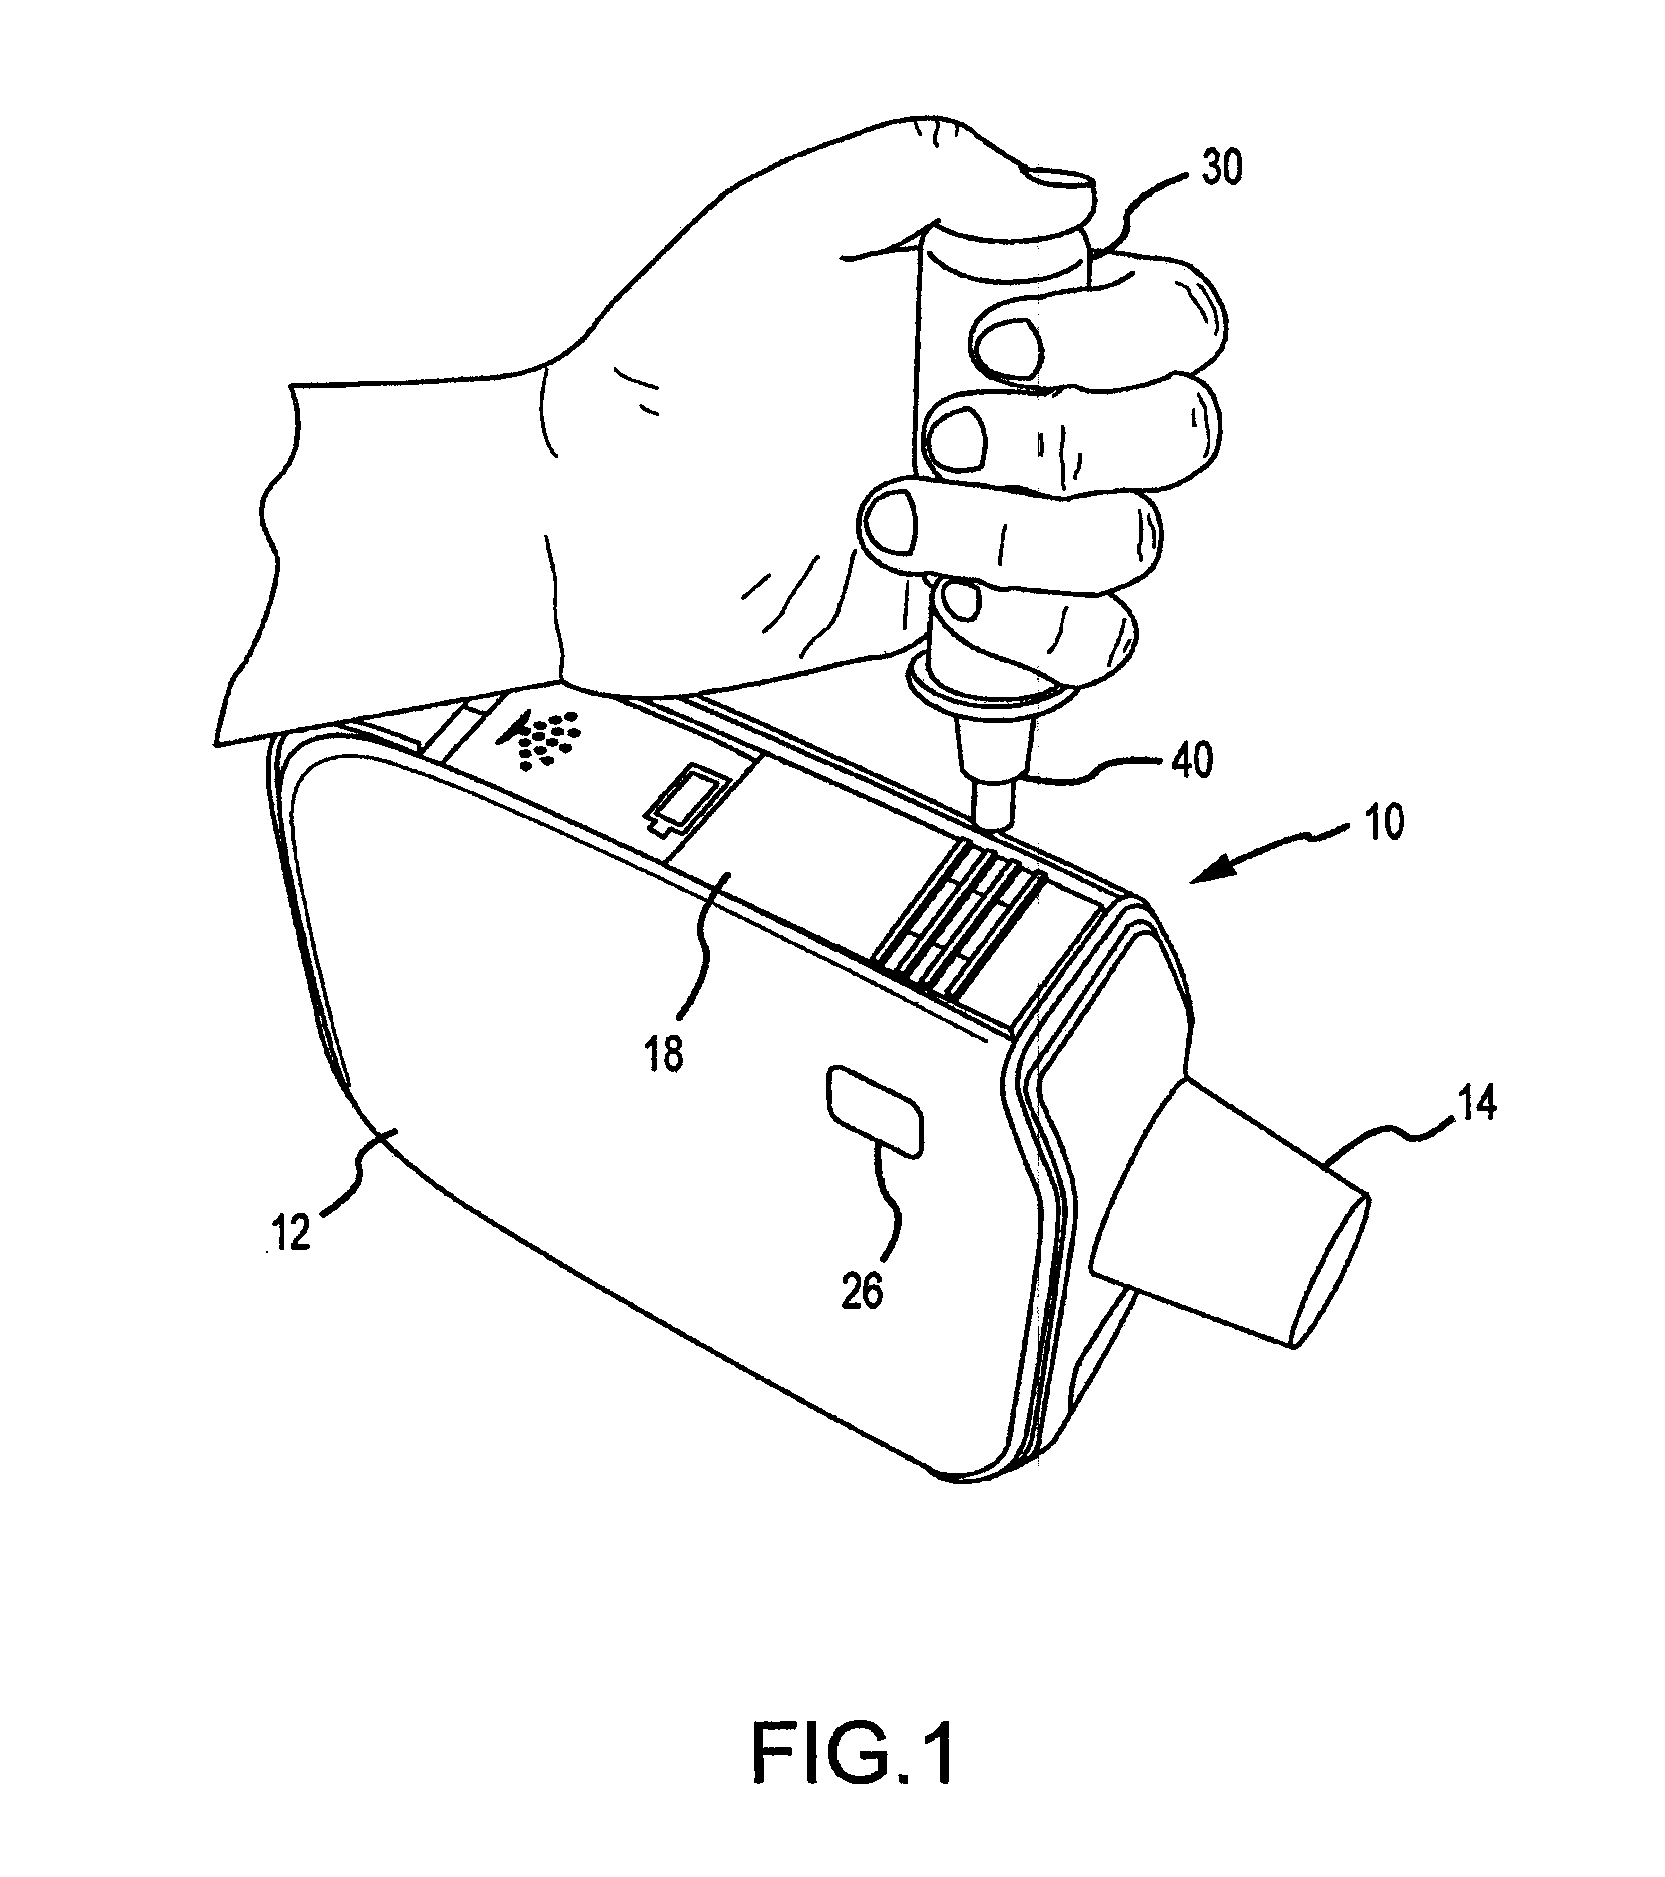 Methods and systems for supplying aerosolization devices with liquid medicaments